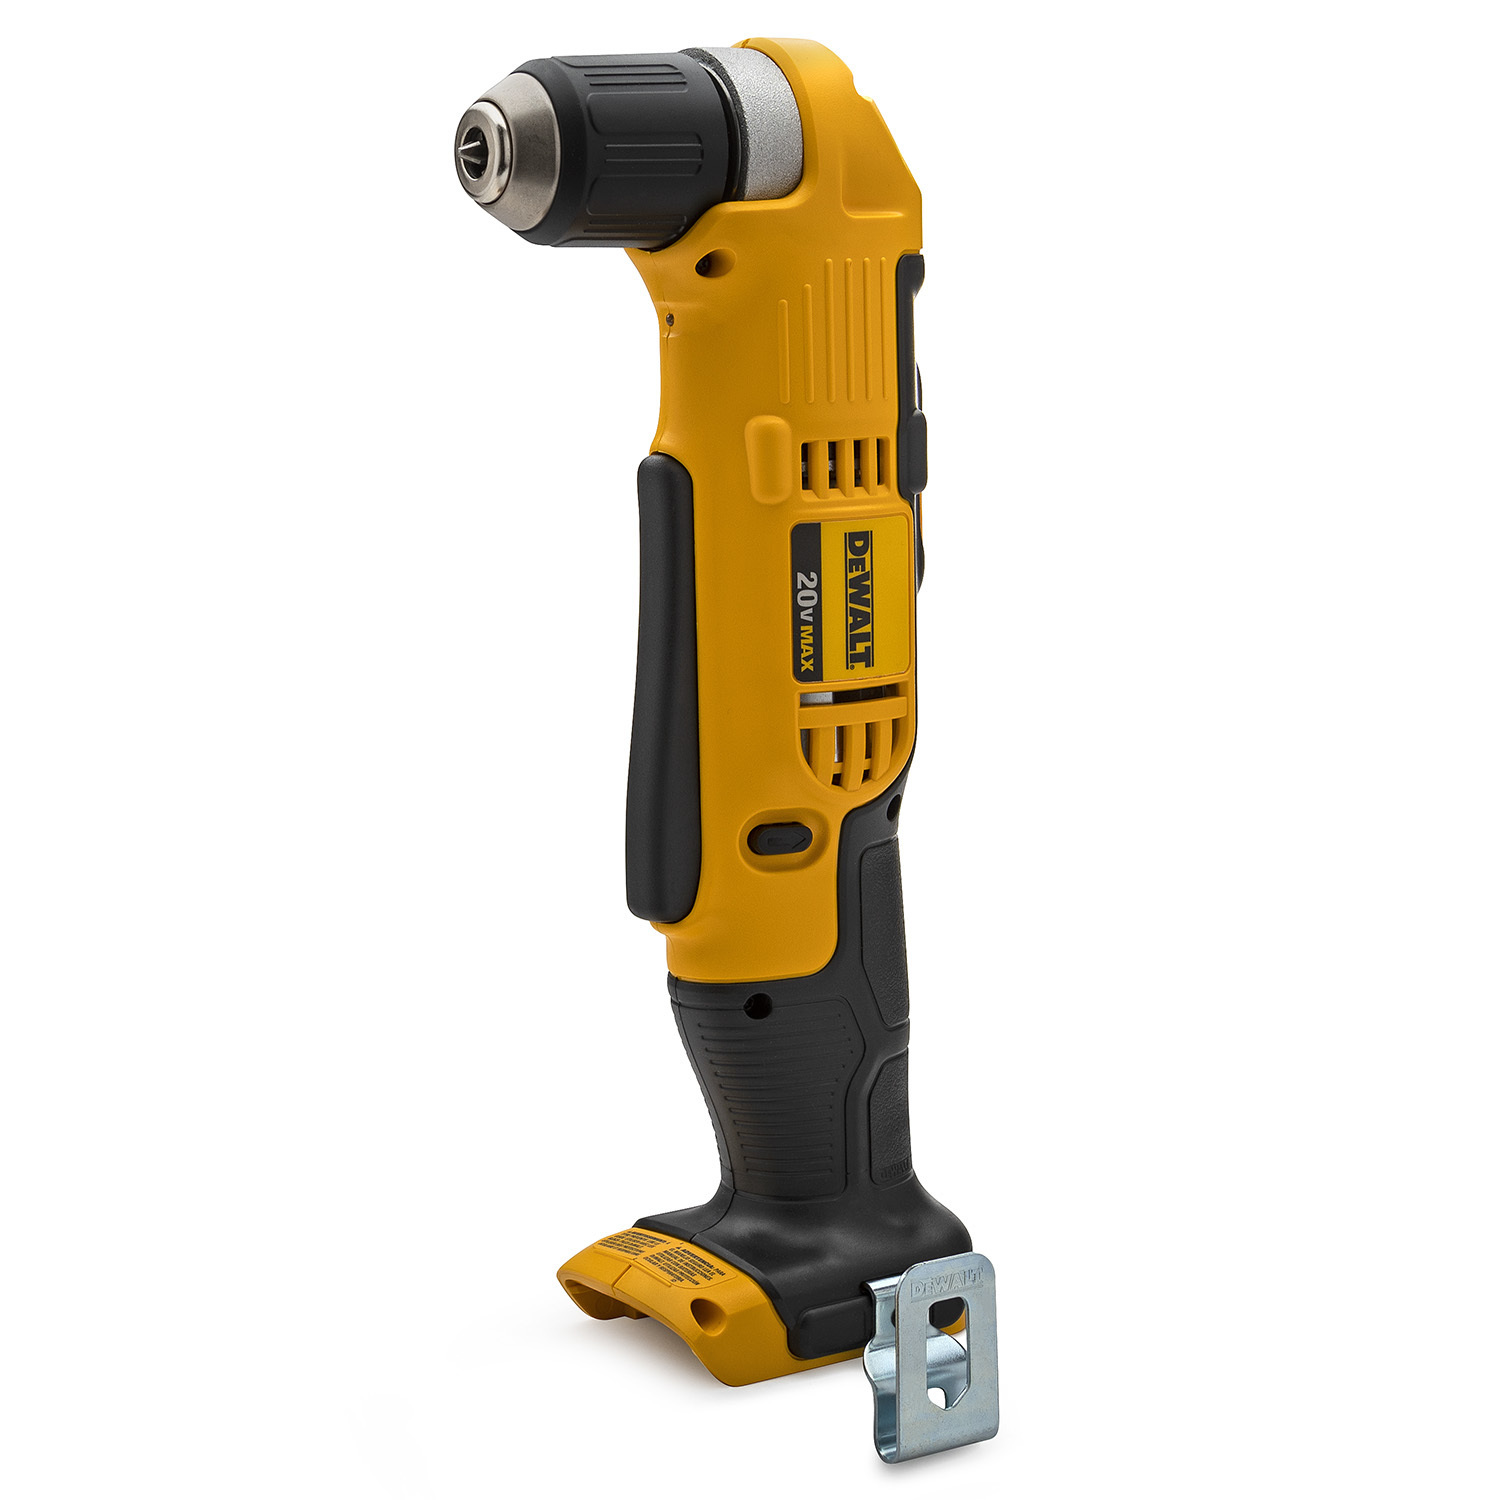 Dewalt 20V MAX Lithium Ion Cordless Right Angle Drill (3/8-Inch) - image 1 of 2